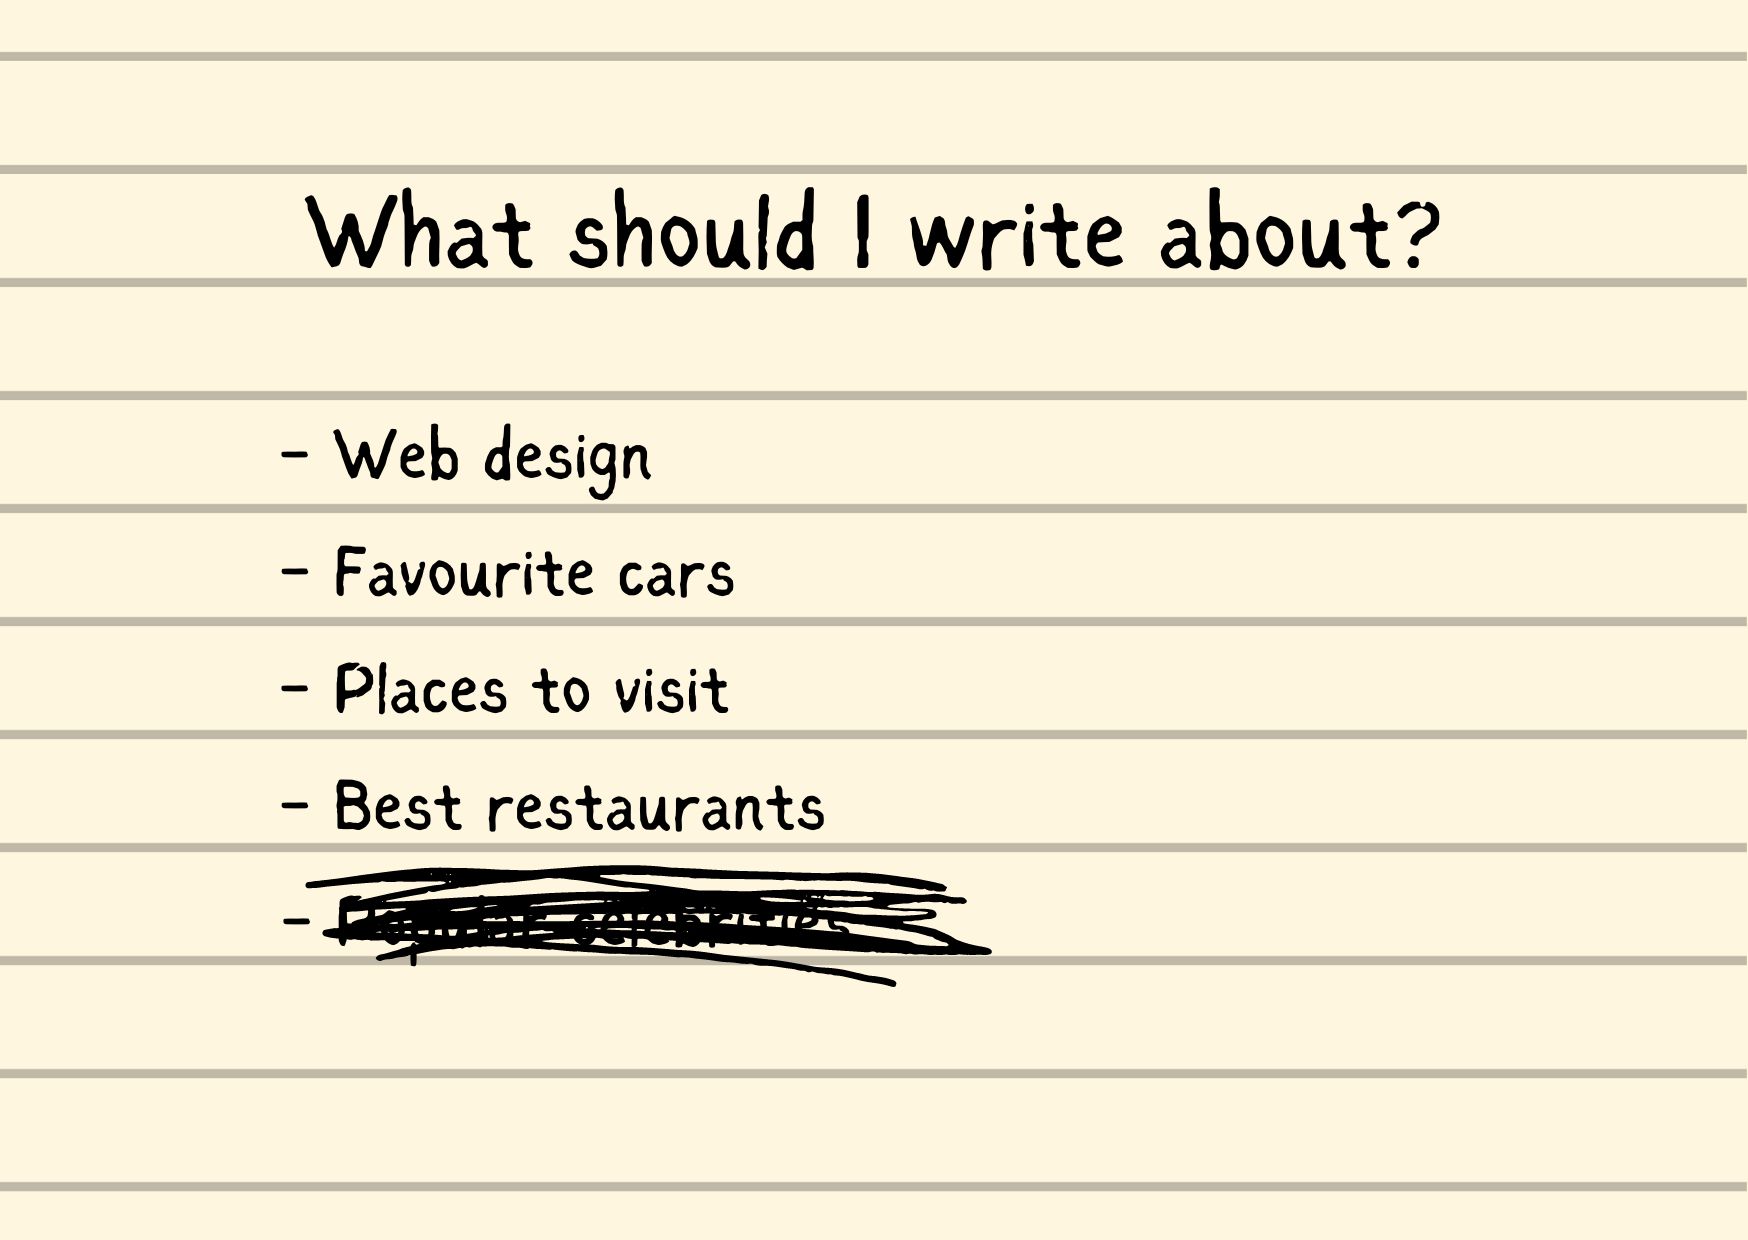 What should I write about?